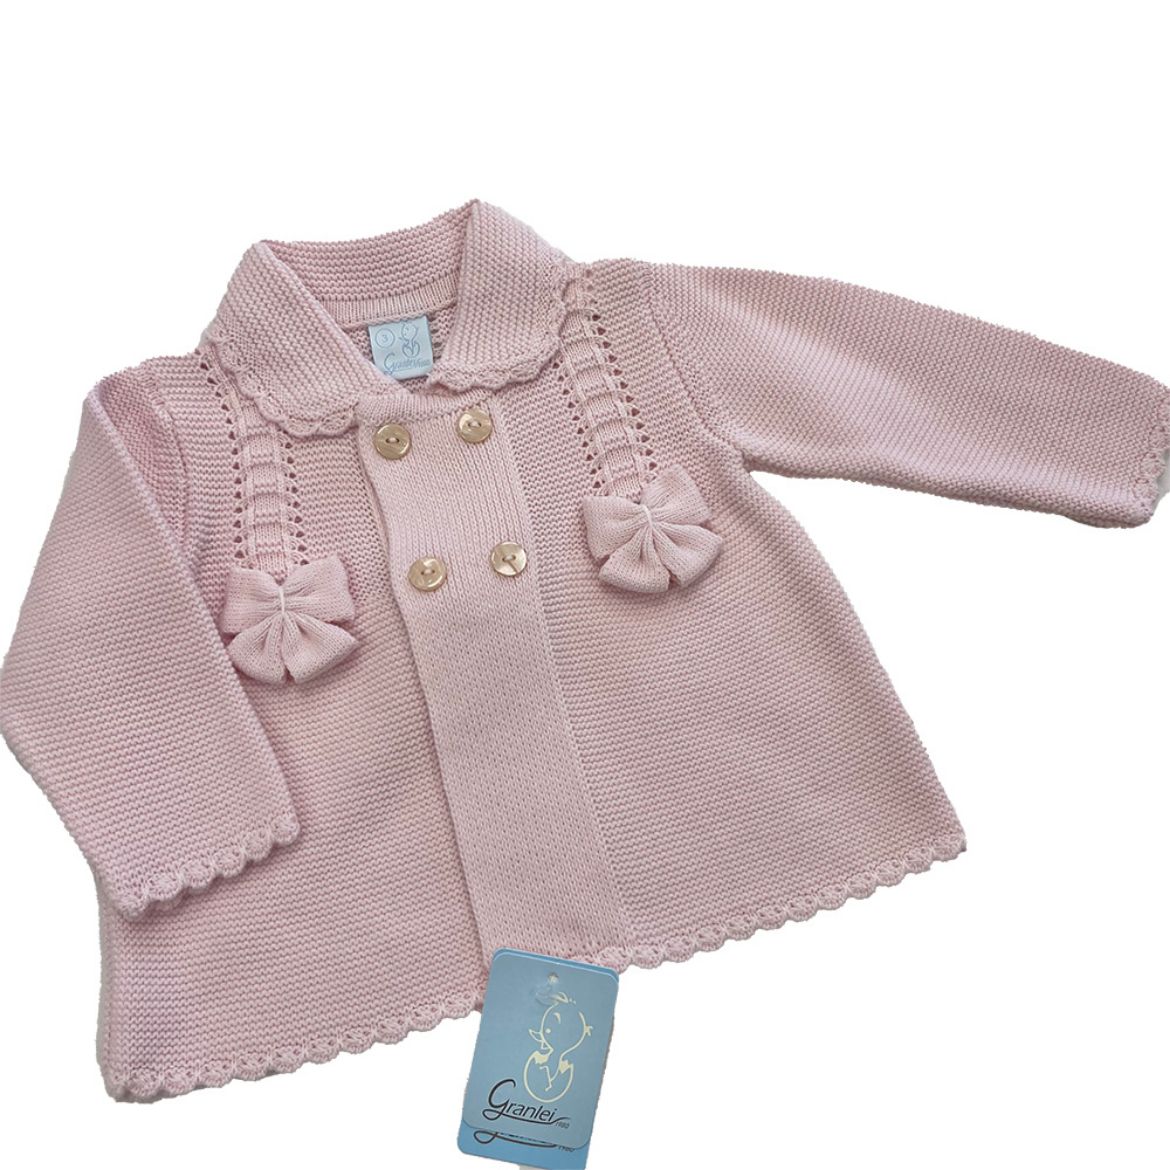 Picture of Granlei Girls Pink Knitted Cardigan with Bow Detail